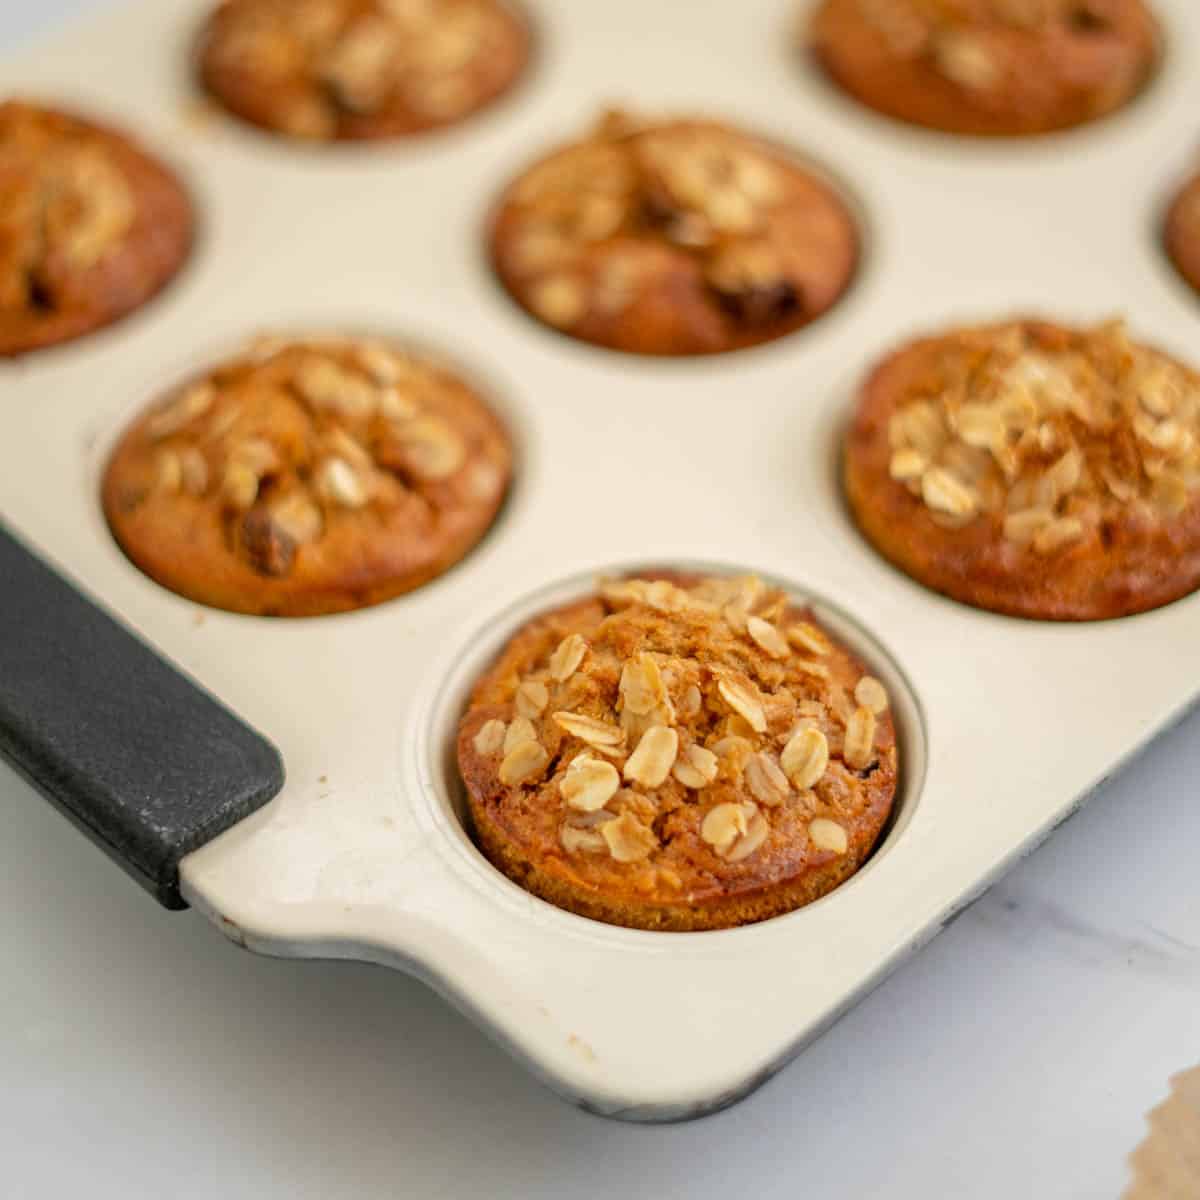 Baked muffins topped with oatmeal in a cream muffin tray